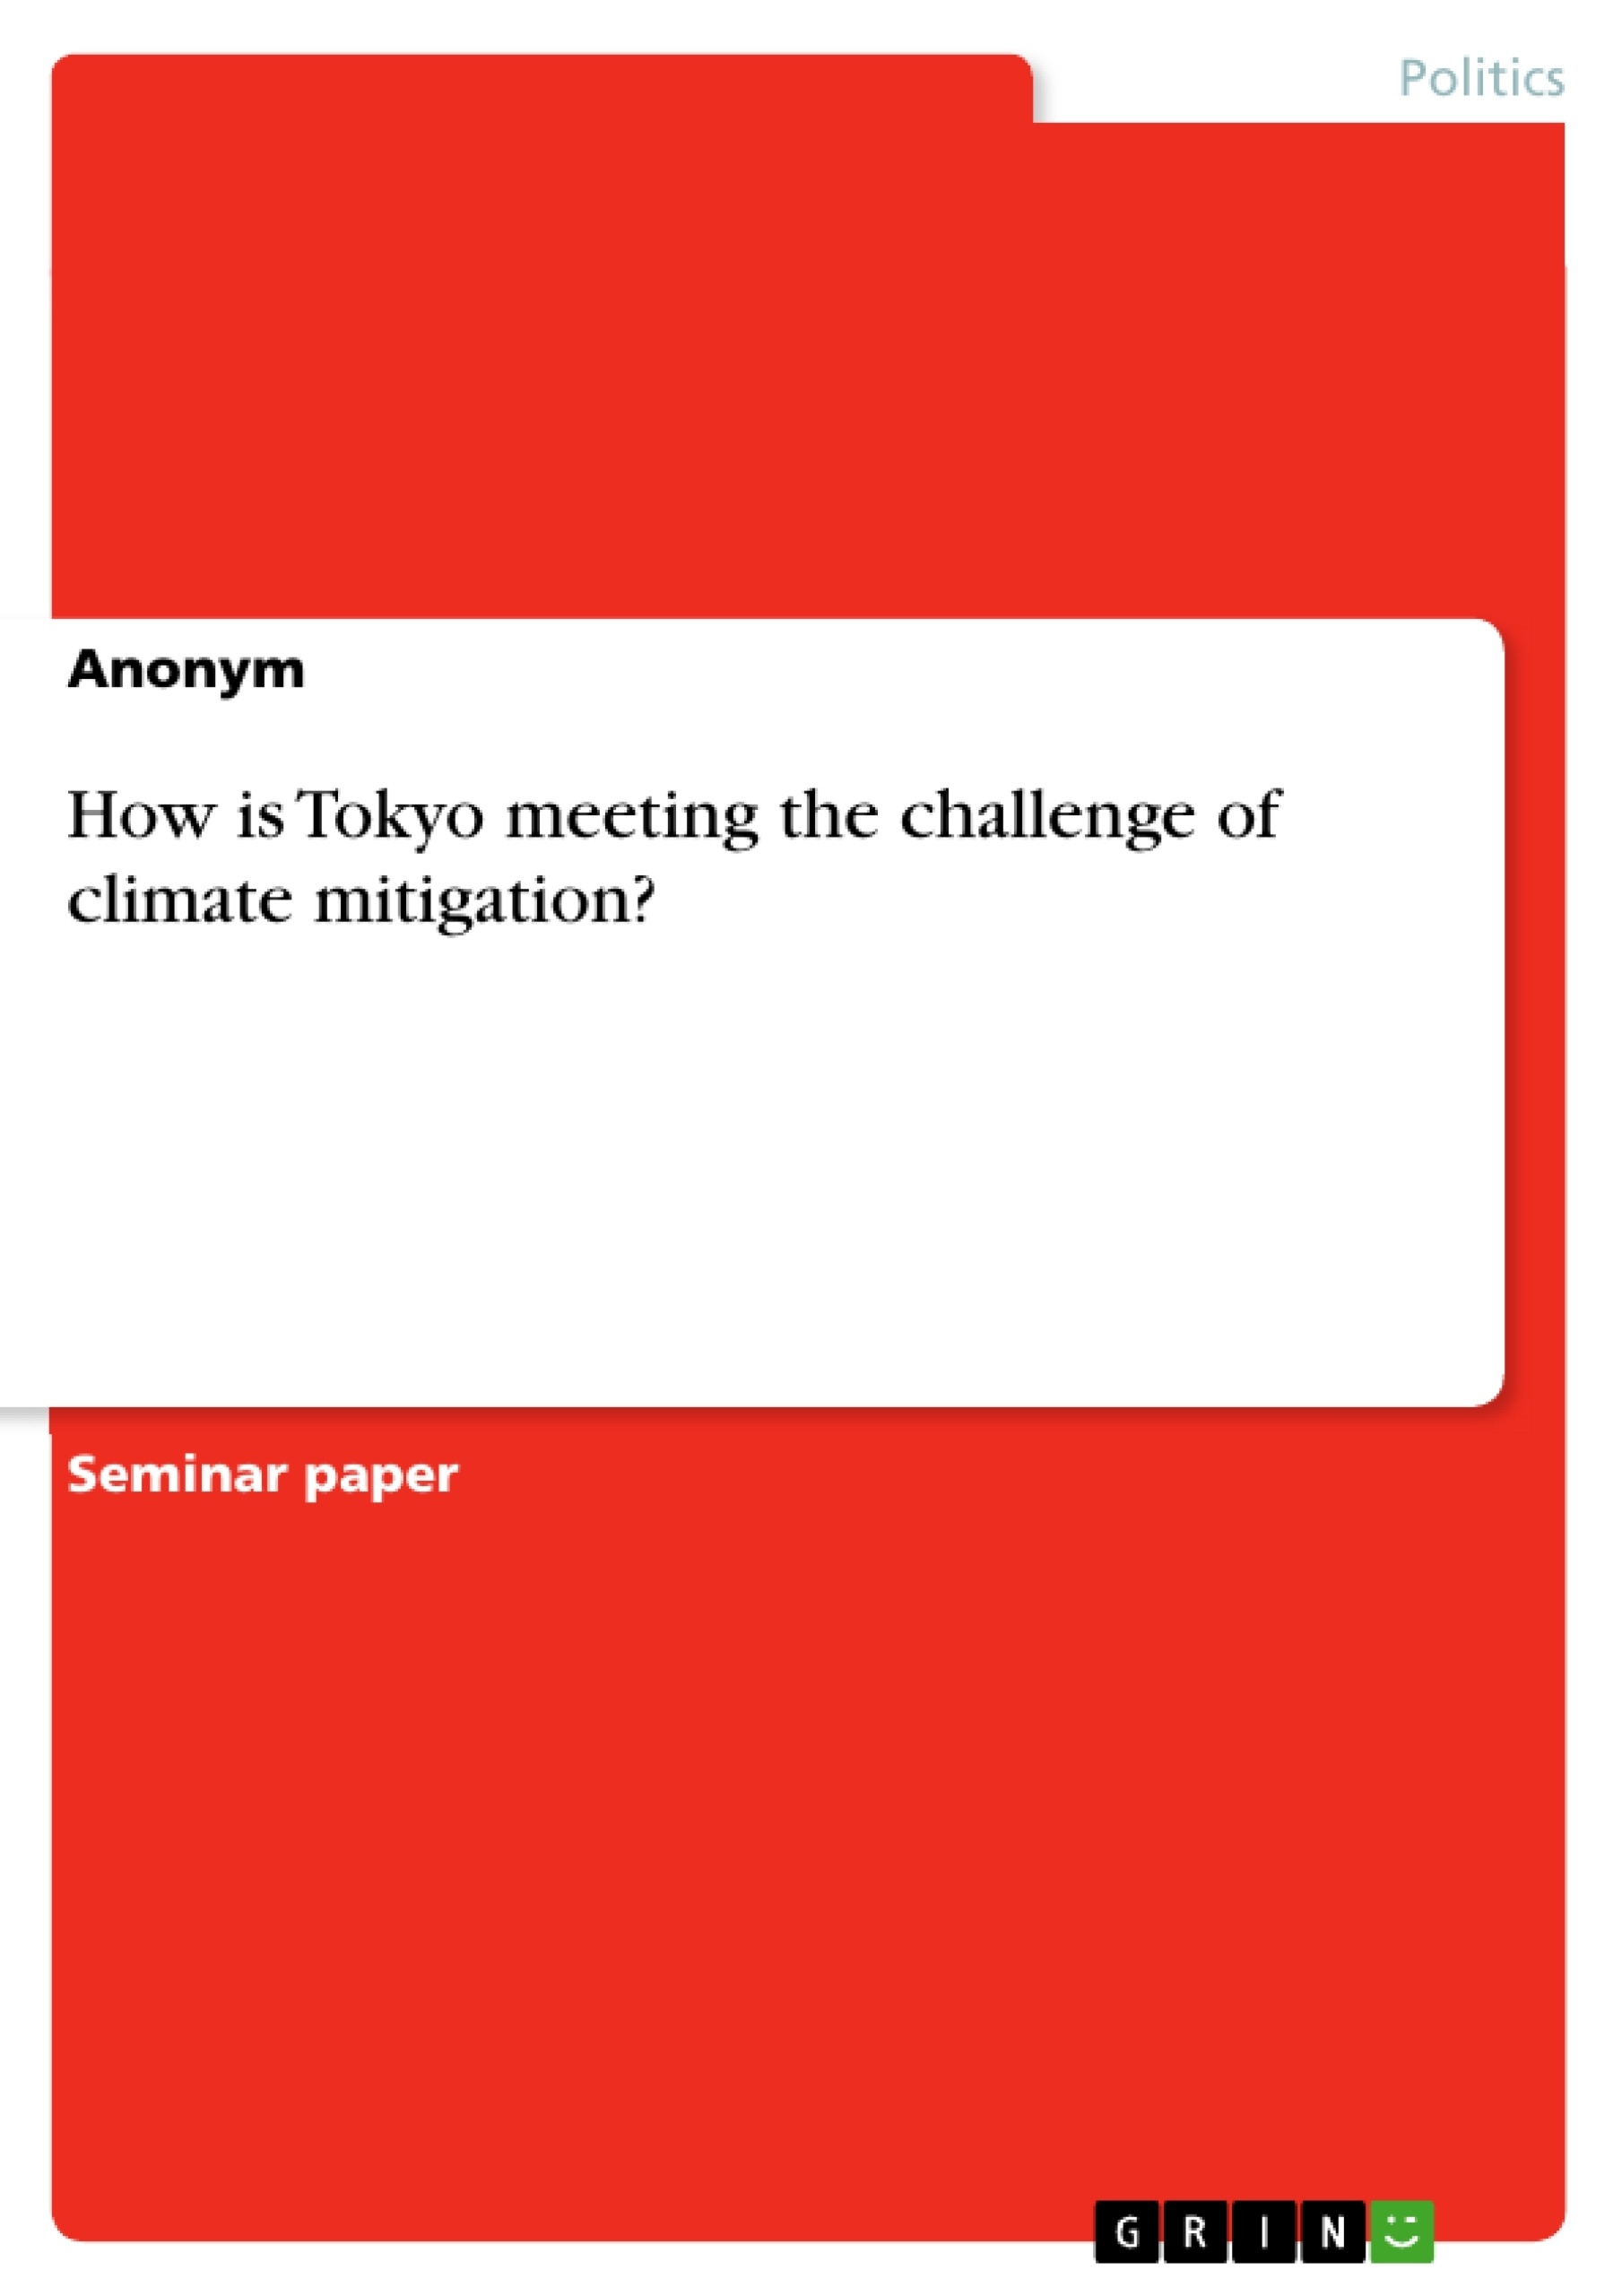 Title: How is Tokyo meeting the challenge of climate mitigation?